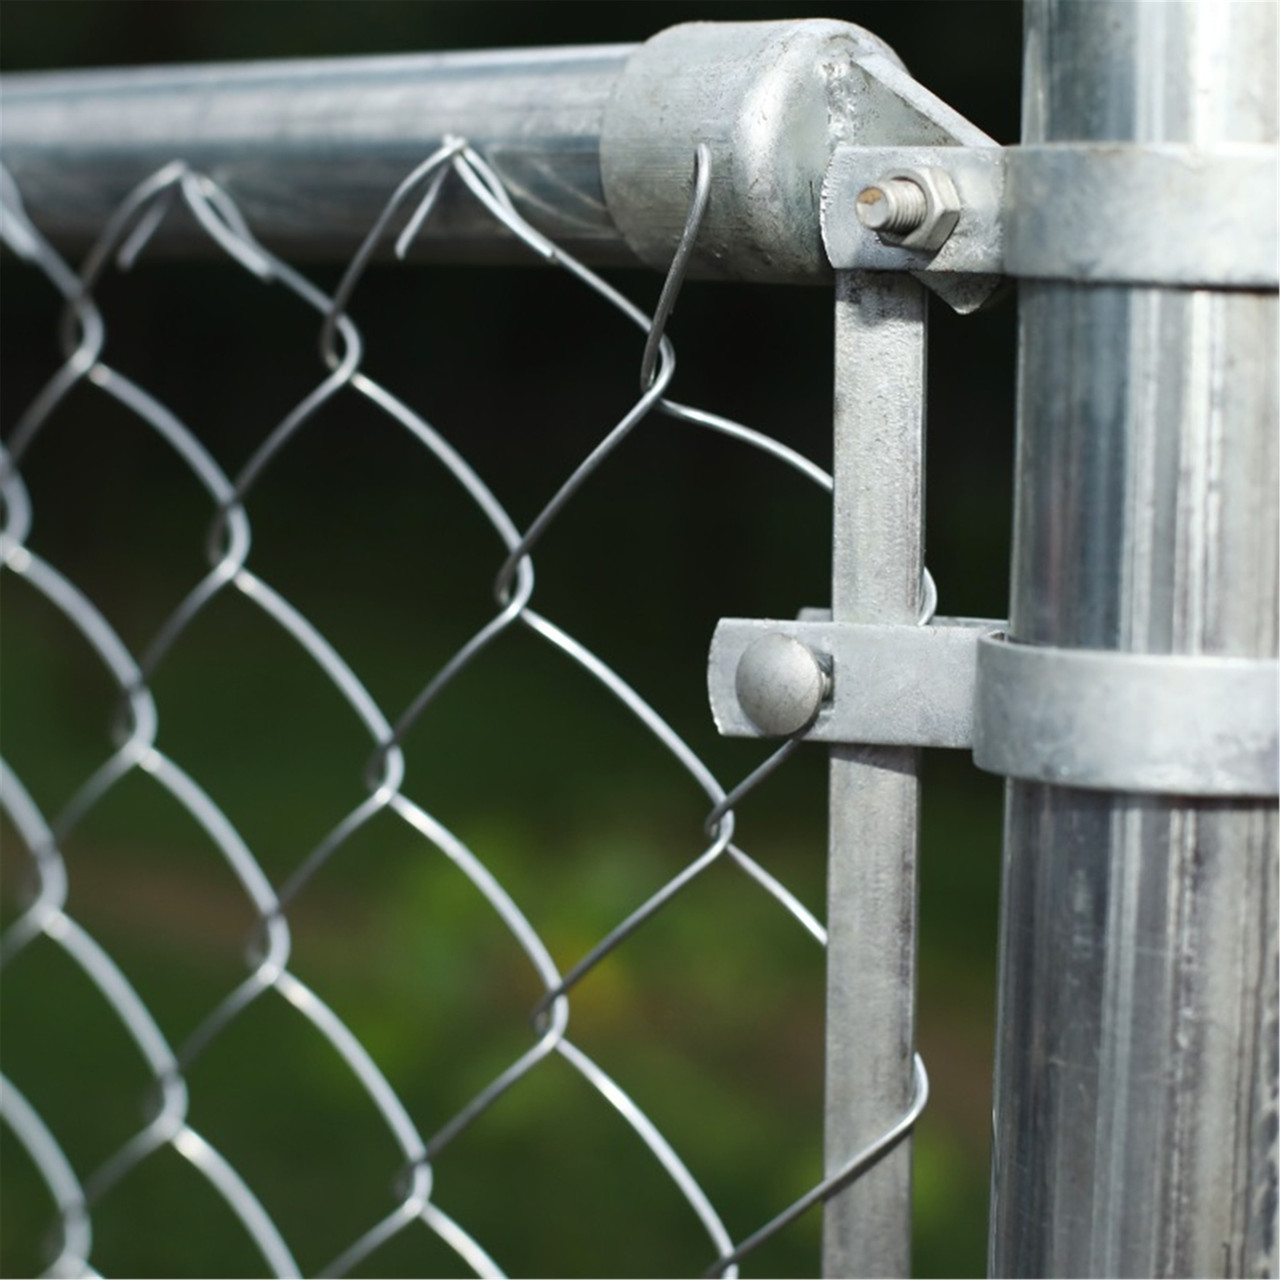 Galvanized Steel Chain Link Fence - 5 x 50 ft. - 11.5 AW Gauge